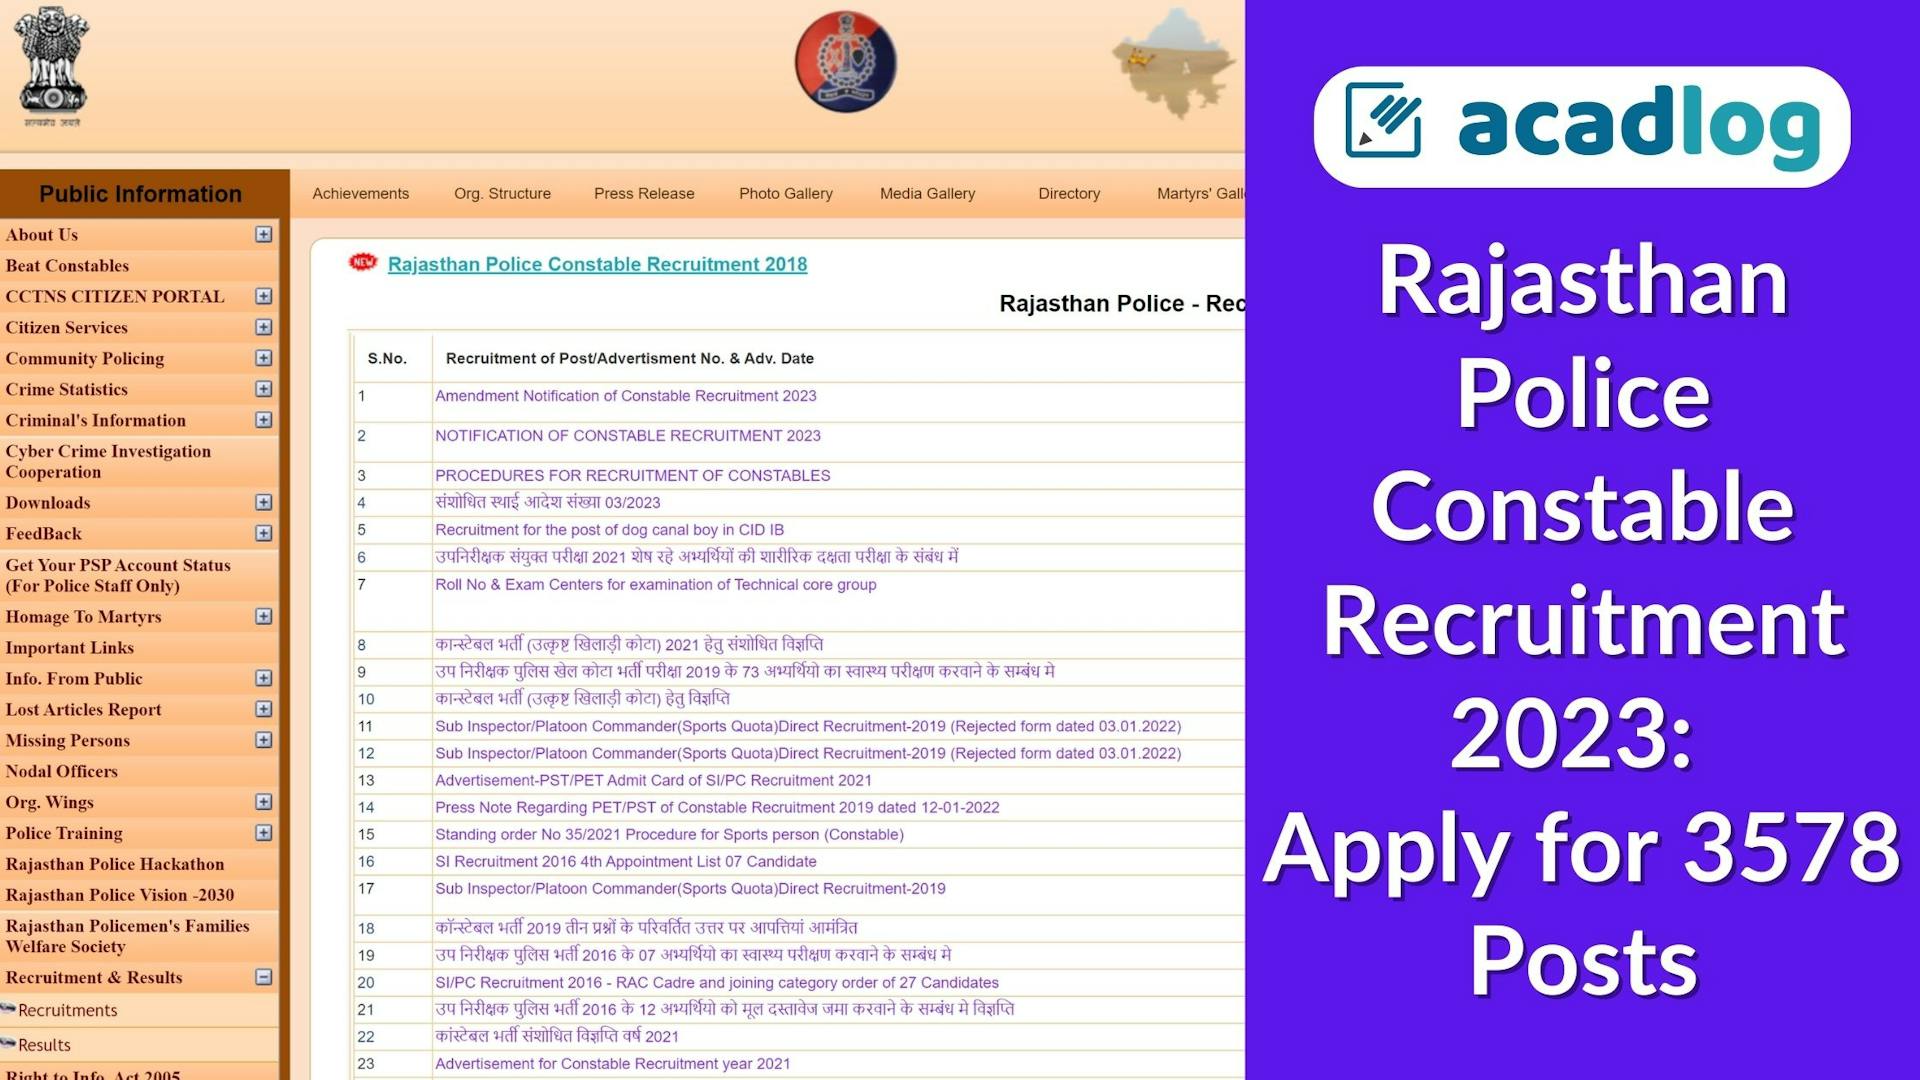 Rajasthan Police Constable Recruitment 2023: Apply for 3578 Posts